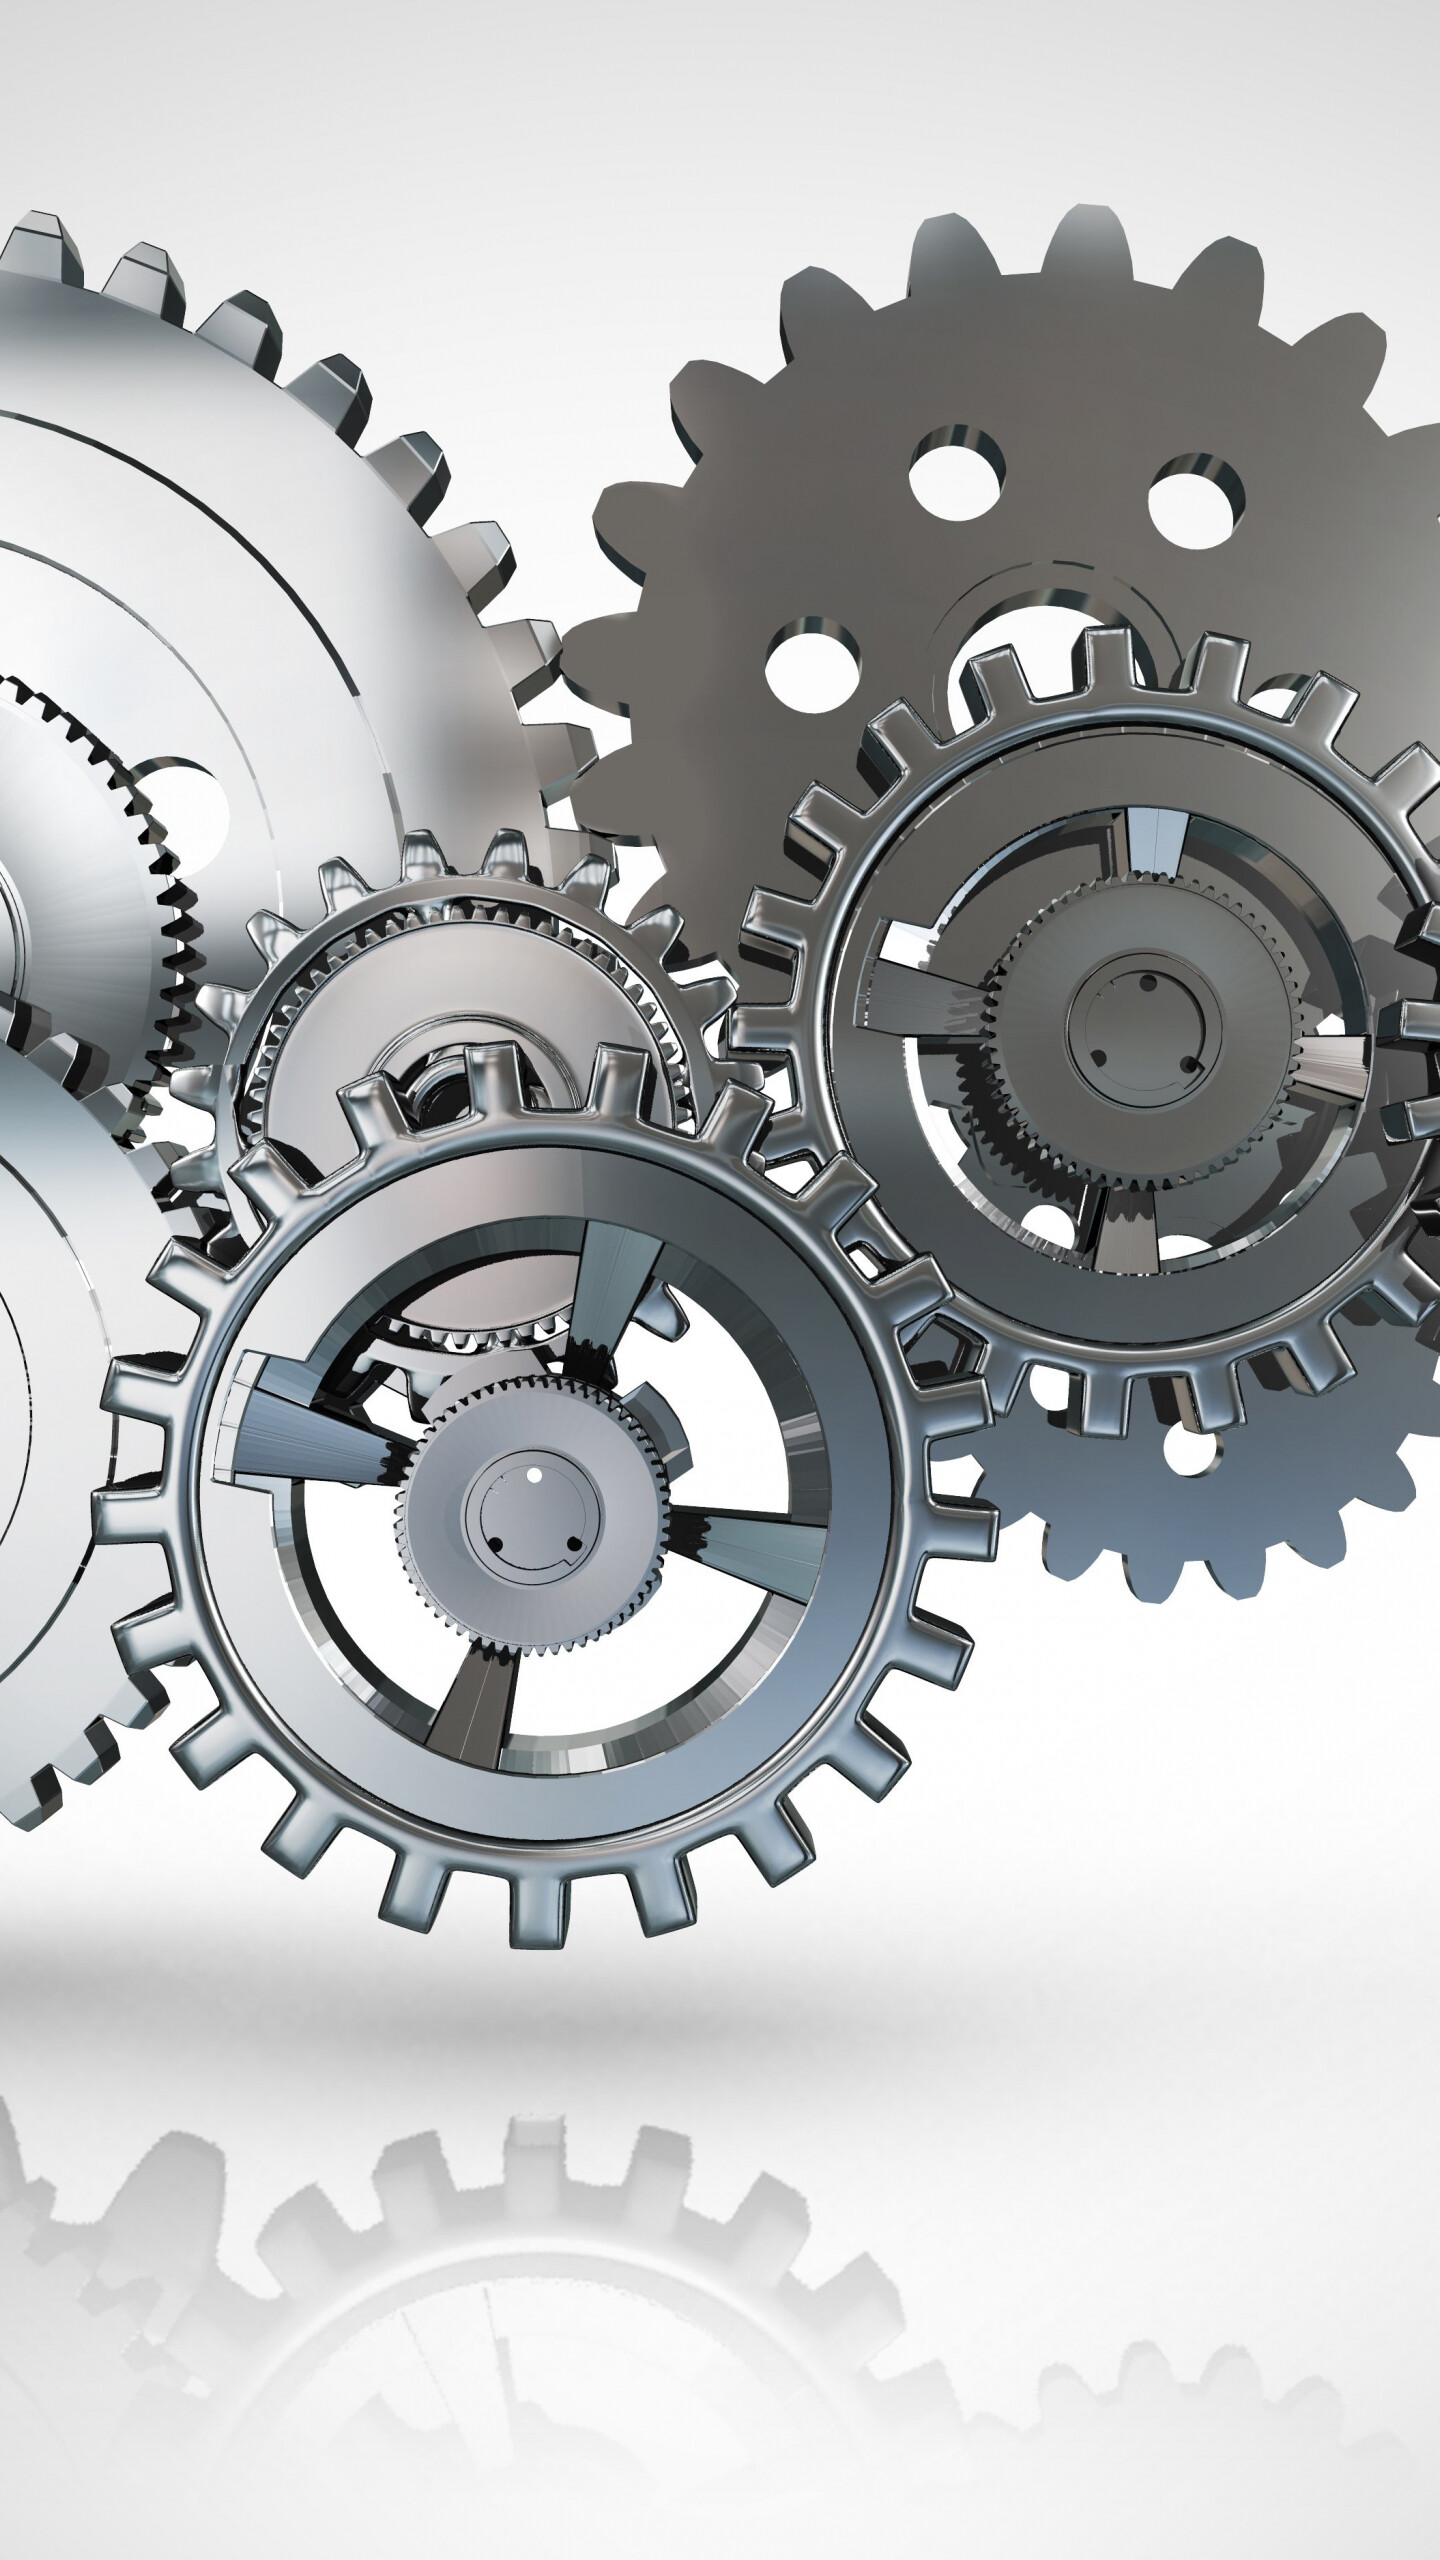 Gear: A rotating machine which has cogs, Mechanical engineering, Cog mechanism. 1440x2560 HD Wallpaper.